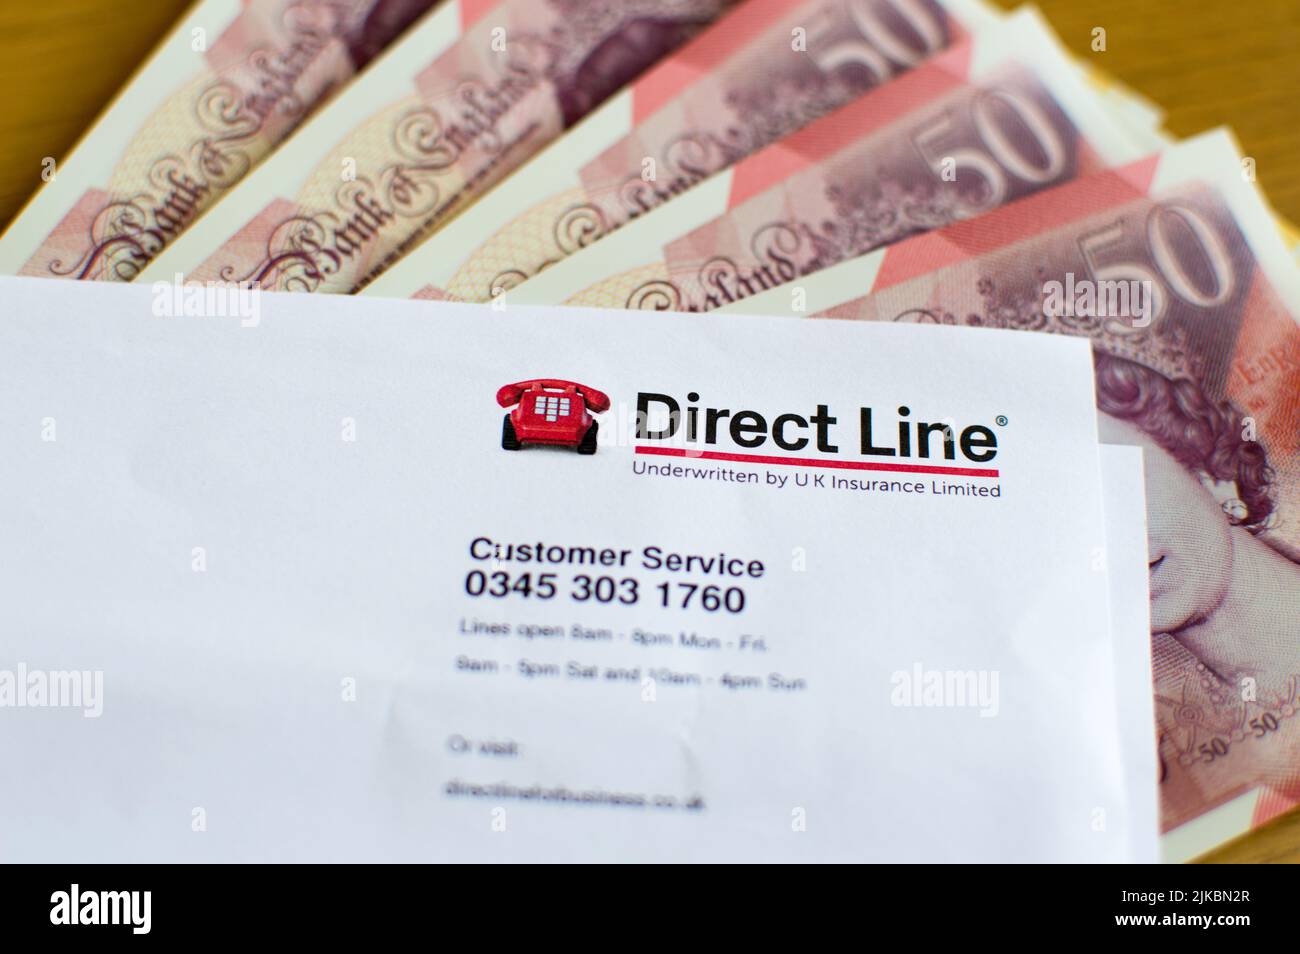 Directline Insurance and cash currency in background Stock Photo